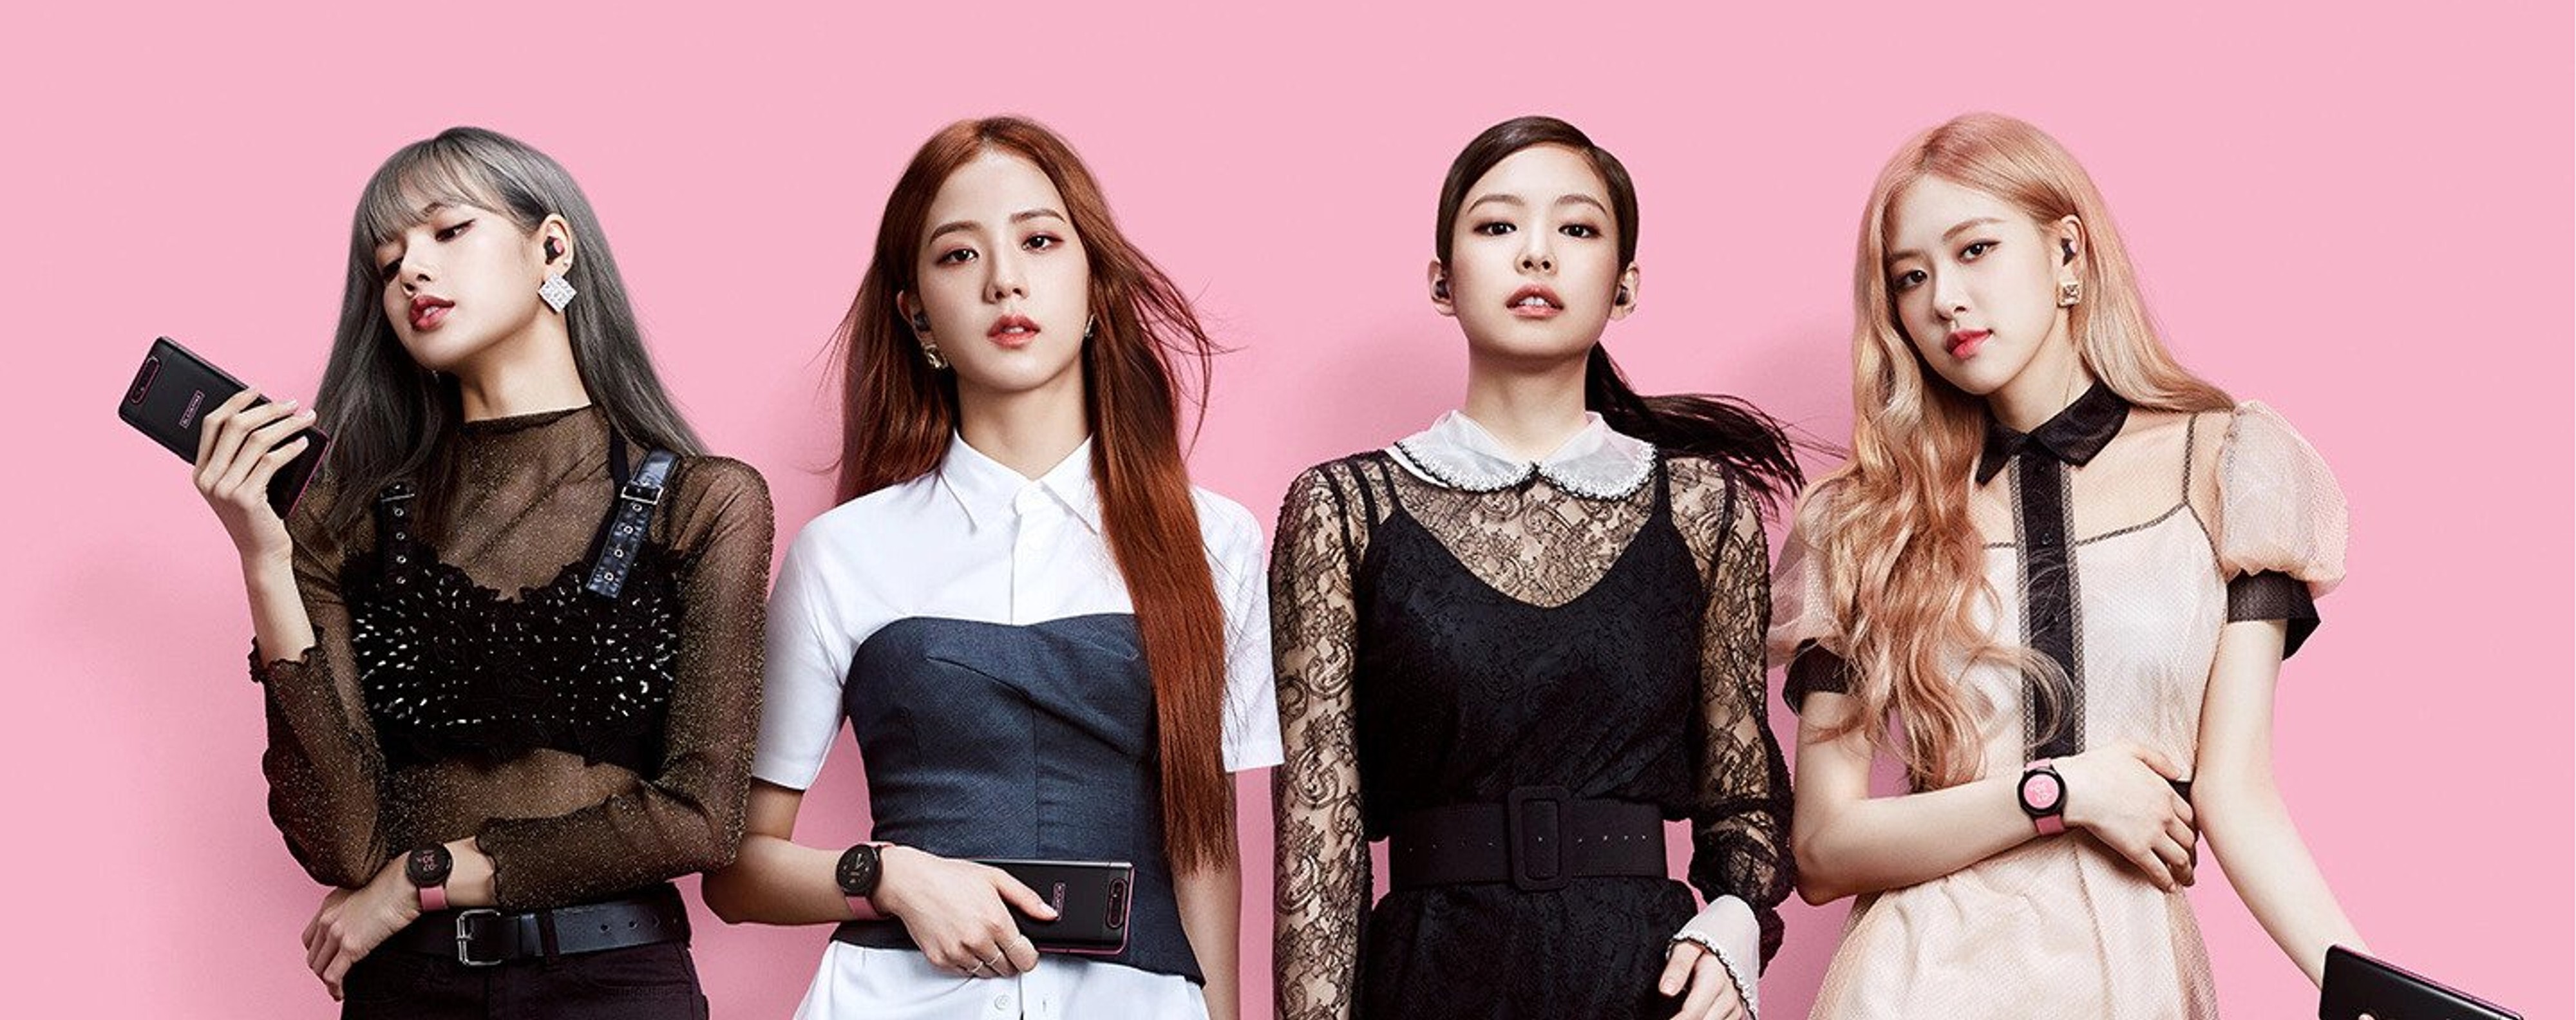 Blackpink Are Unshakeable Samsung Ambassadors Jisoo Jennie Rose And Lisa Refuse Iphone Selfies Have Special Galaxy S Colours In Their Honour And Show Off The South Korean Smartphone Brand In Music Videos